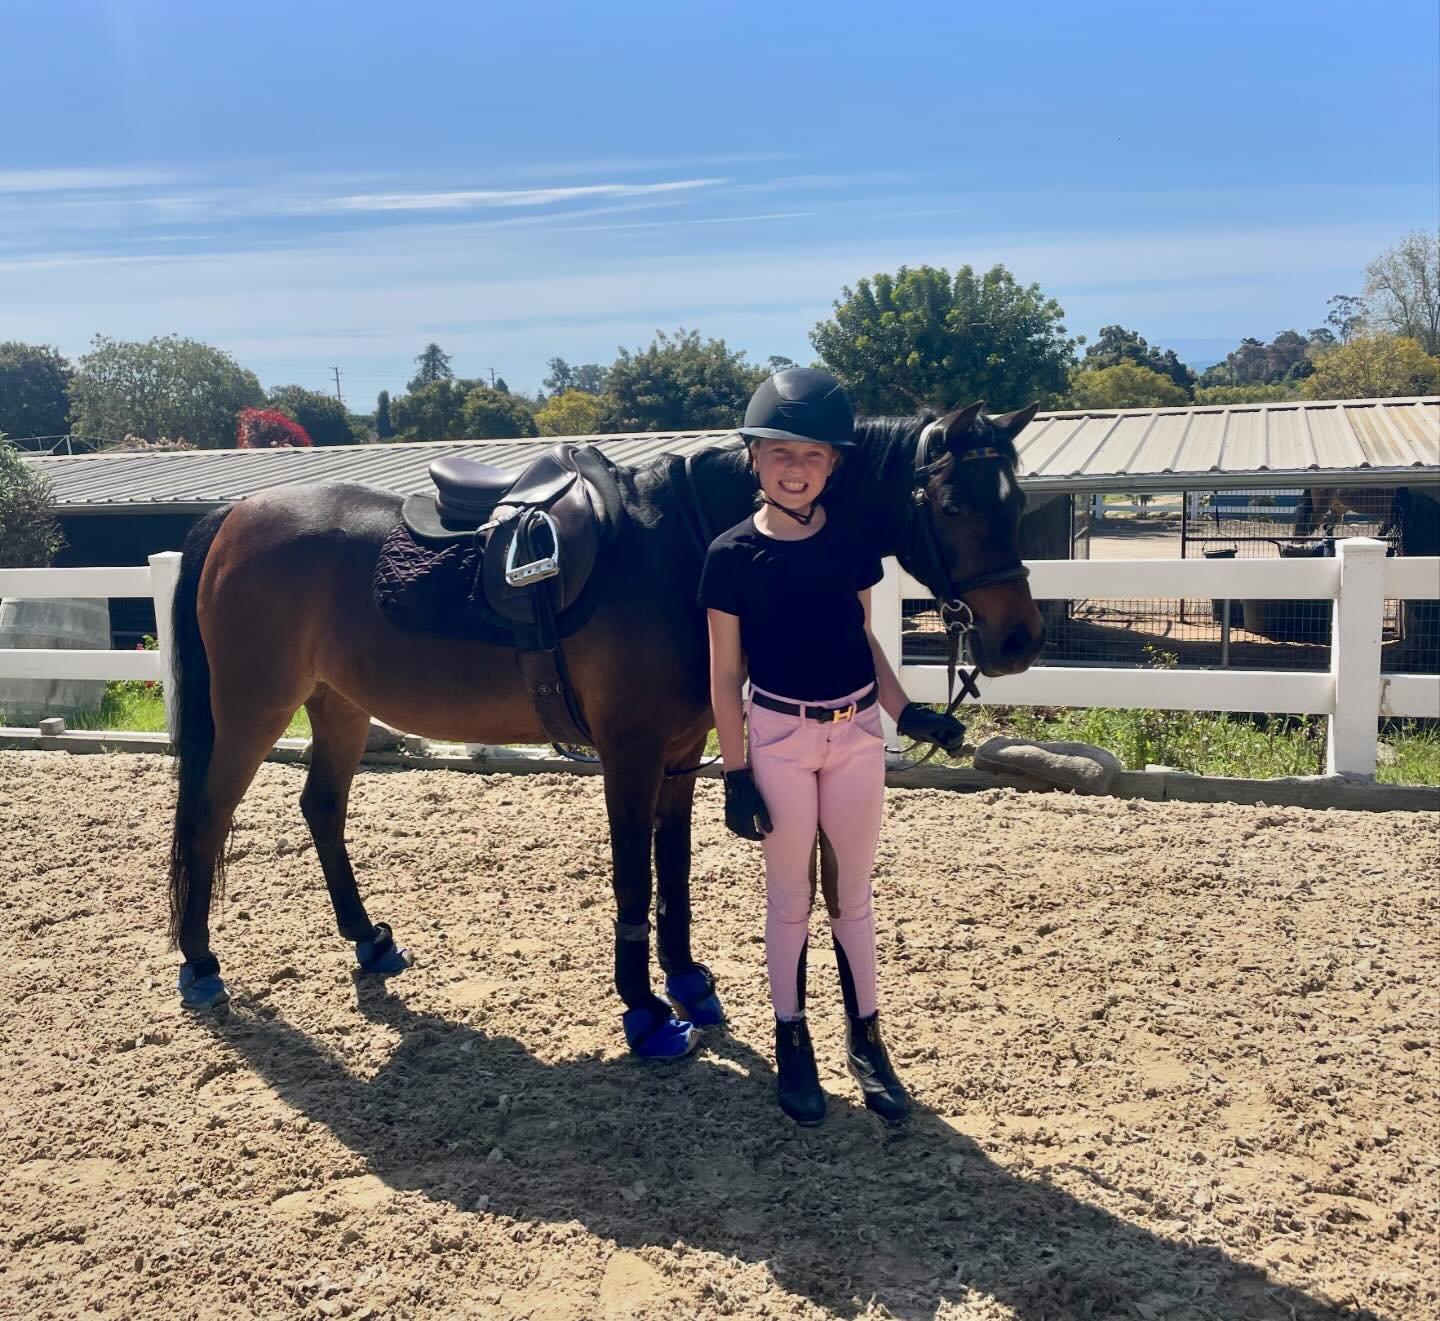 Congratulations to Grace Green on the Lease of BJERREGARDS KATJA. So happy Millie gets to stay in the barn and we are so excited for Grace on this new endeavor in the jumper ring. Look for this new team!